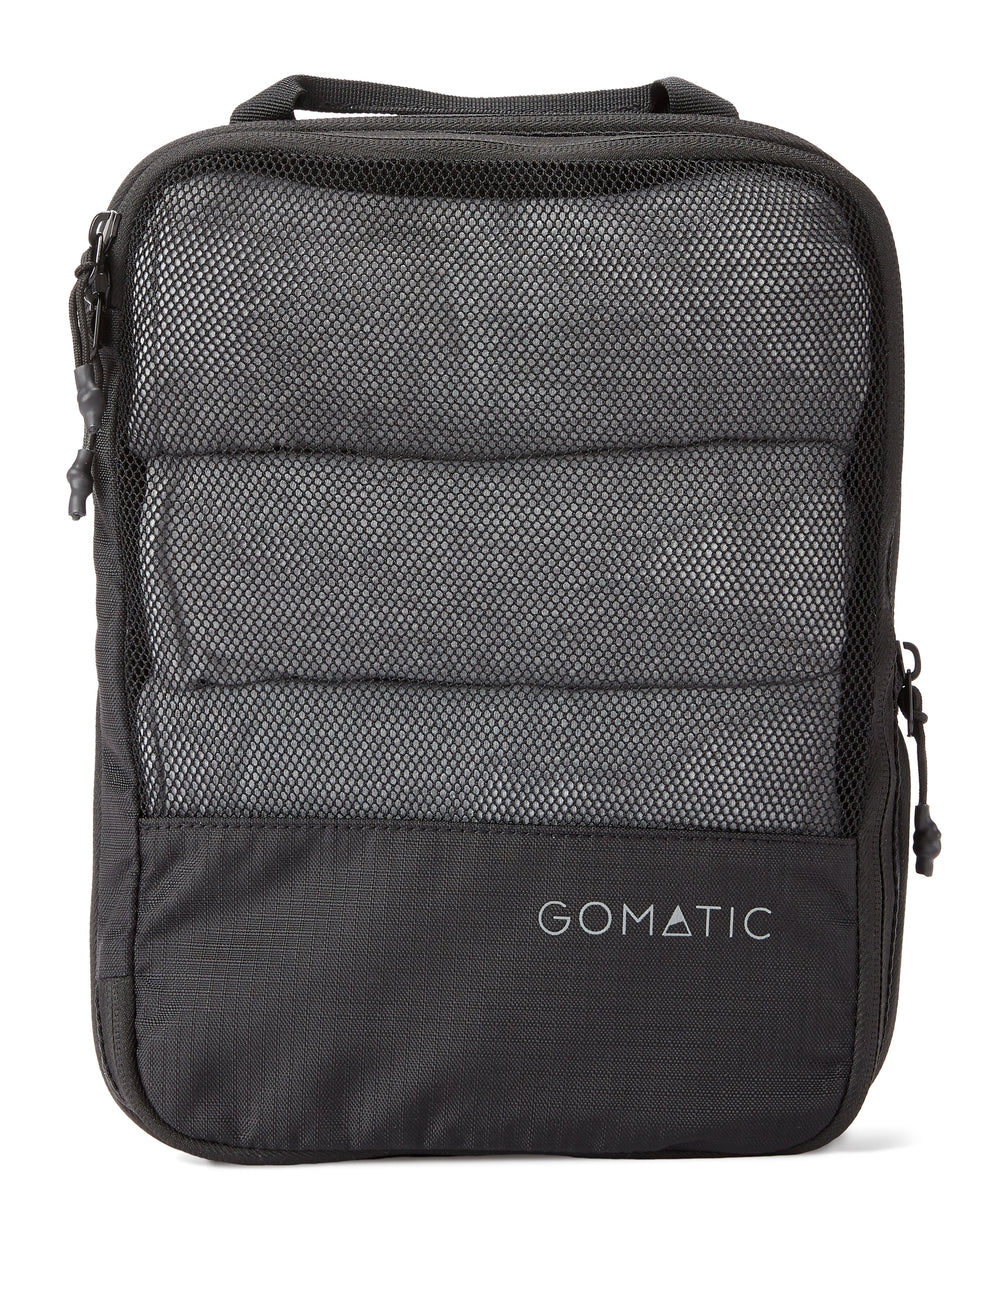 Packing Cubes - GOMATIC Travel Bags and Packs